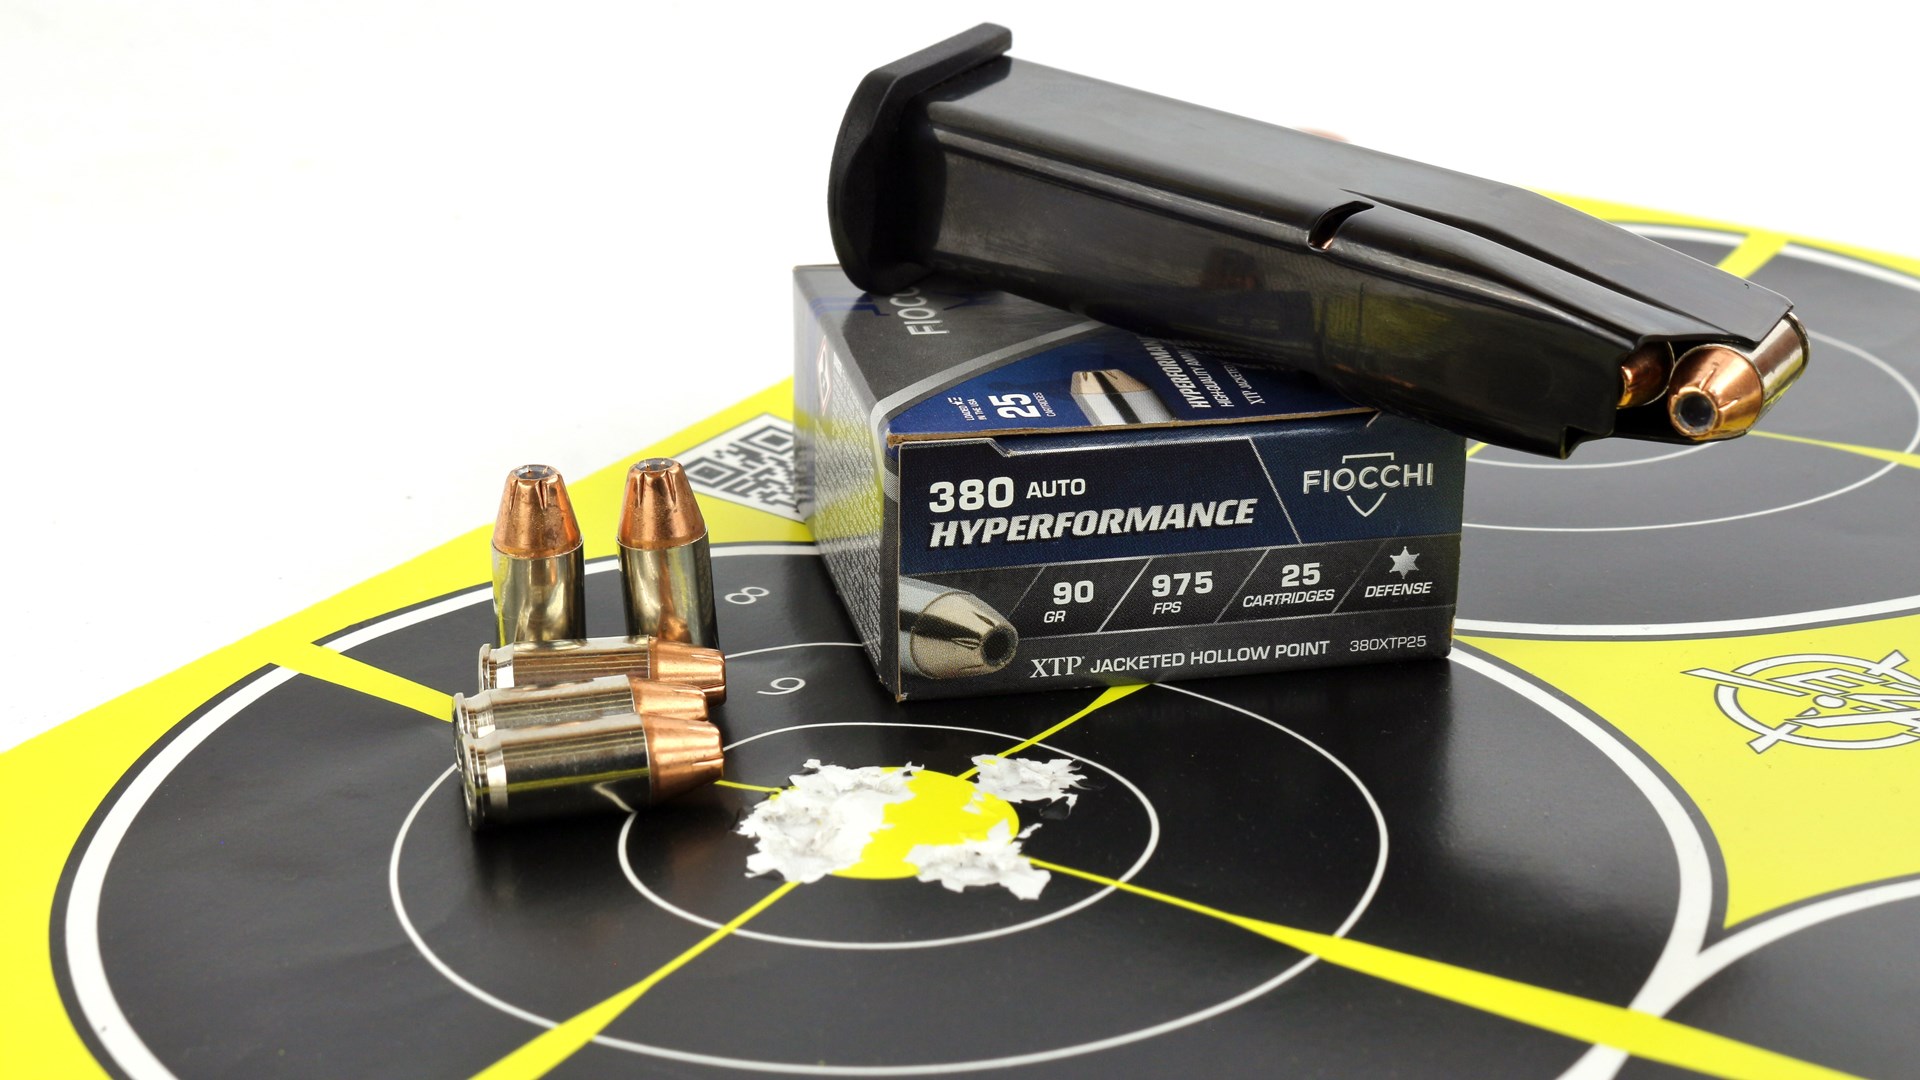 Fiocchi 380 Auto Hyperformance ammunition box shown on bullseye target with loose rounds ammunition cartridges loaded mag resting on top of ammunition box